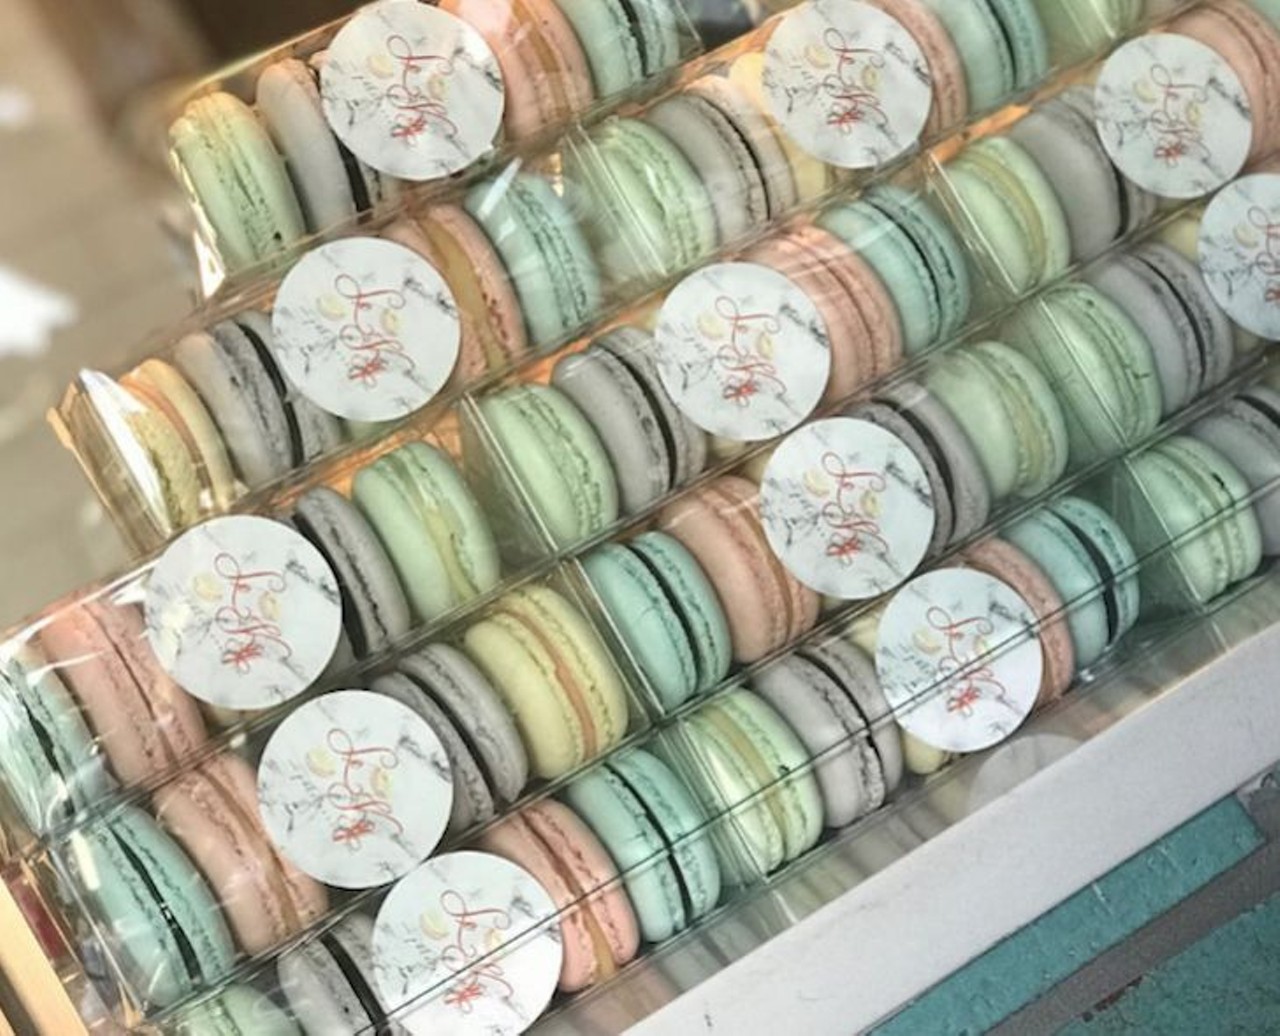 Le Ky Patisserie
2411 Curry Ford Road, 407-413-5453
This pastry shop in the Hourglass District offers delights to satisfy any sweet tooth, such as seasonal macarons and peanut butter mousse cake.
Photo via Le Ky Patisserie